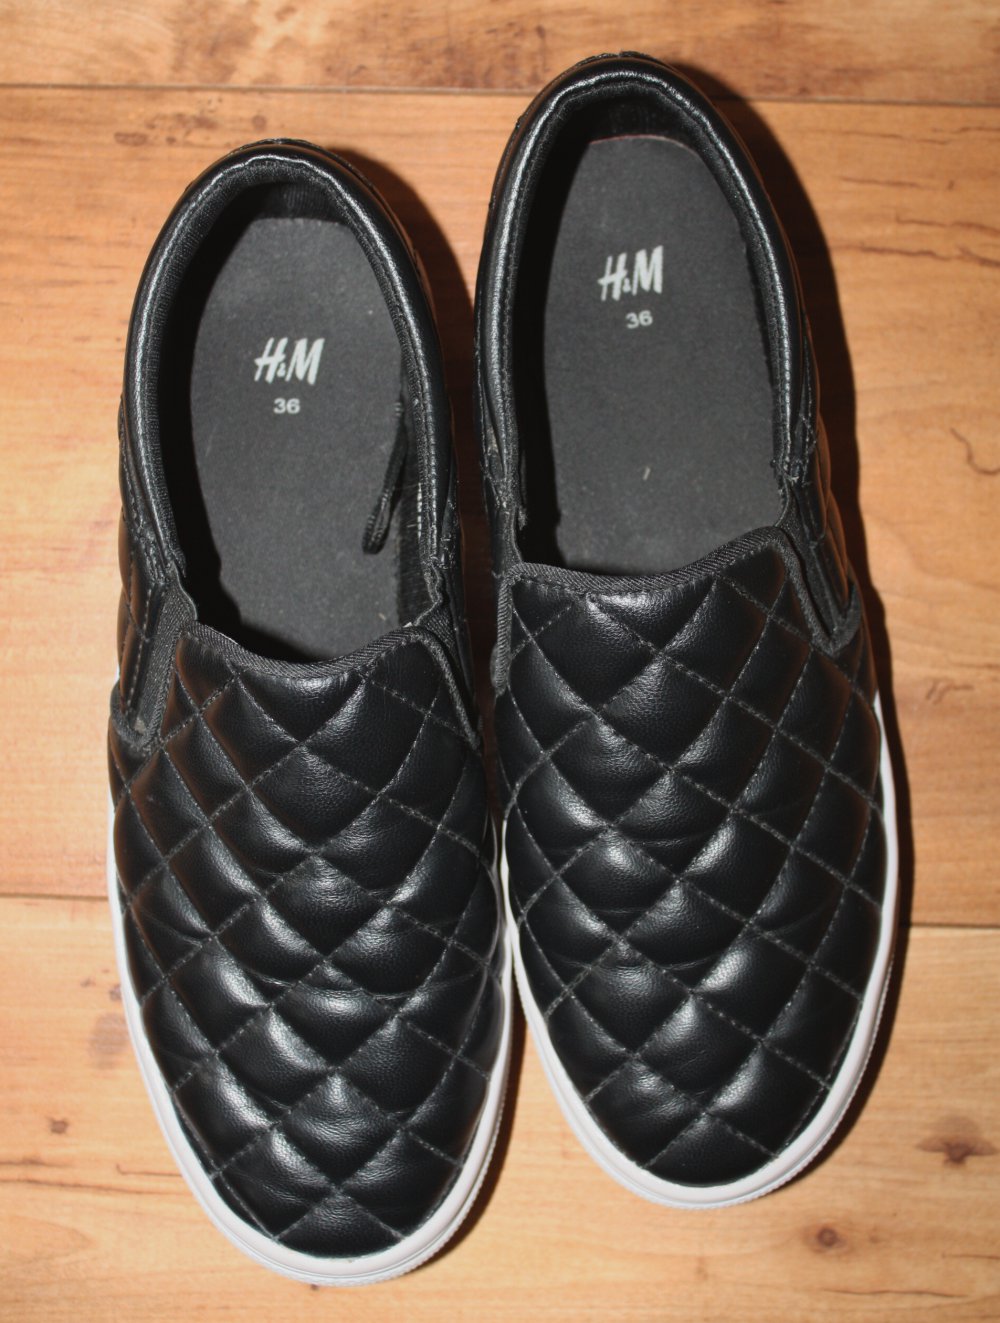 Chaussures Chaussures basses Slips-on H&M Slip-on noir style d\u00e9contract\u00e9 